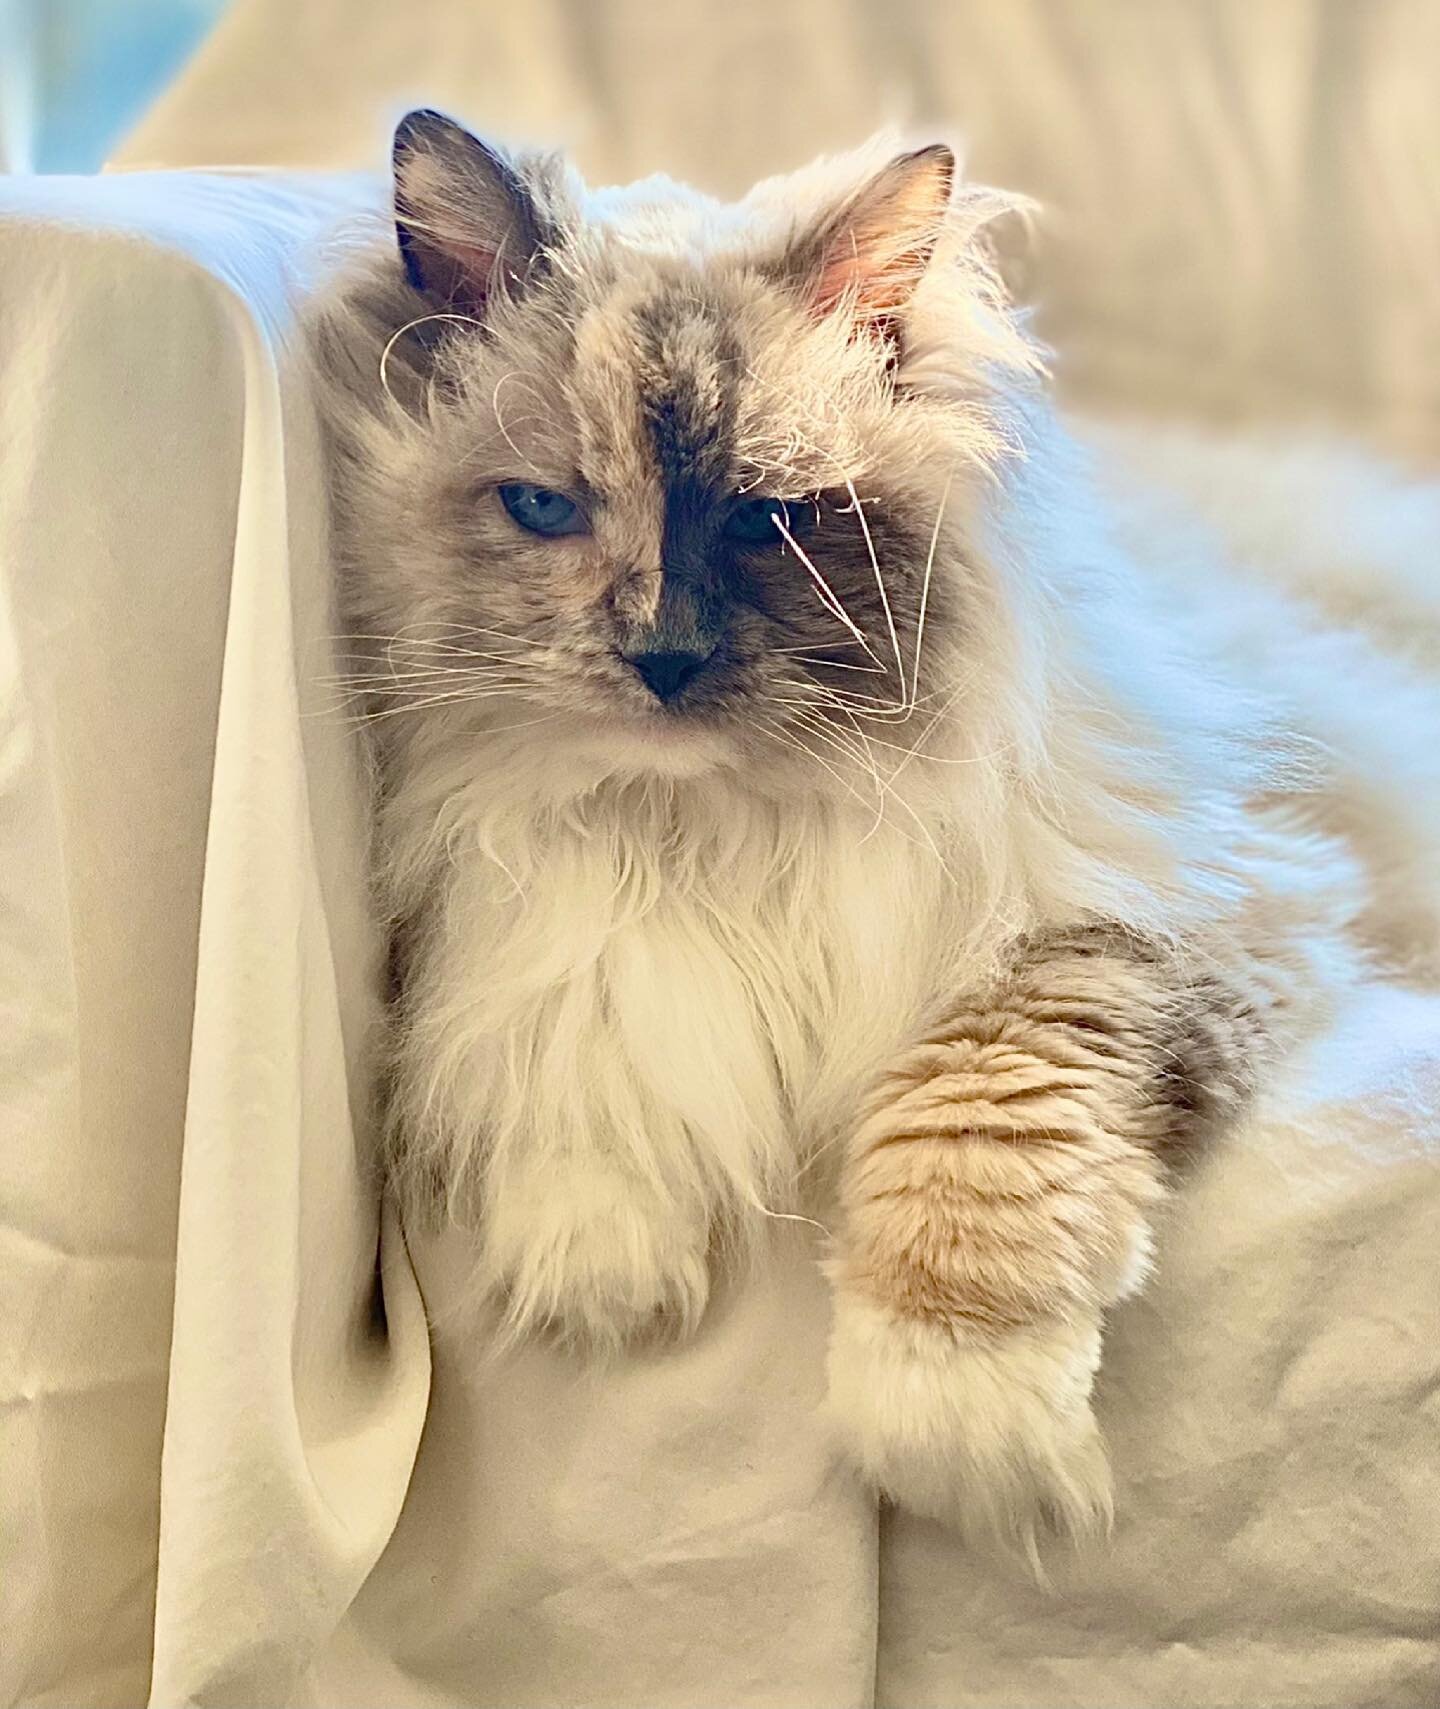 Anything is Paws-bile
Have a fantastic day😀
#mycat
#catsofinstagram #cats 
#cats_of_instagram #ragdollsofinstagram 
#ragdolls #lovemycat #mypet